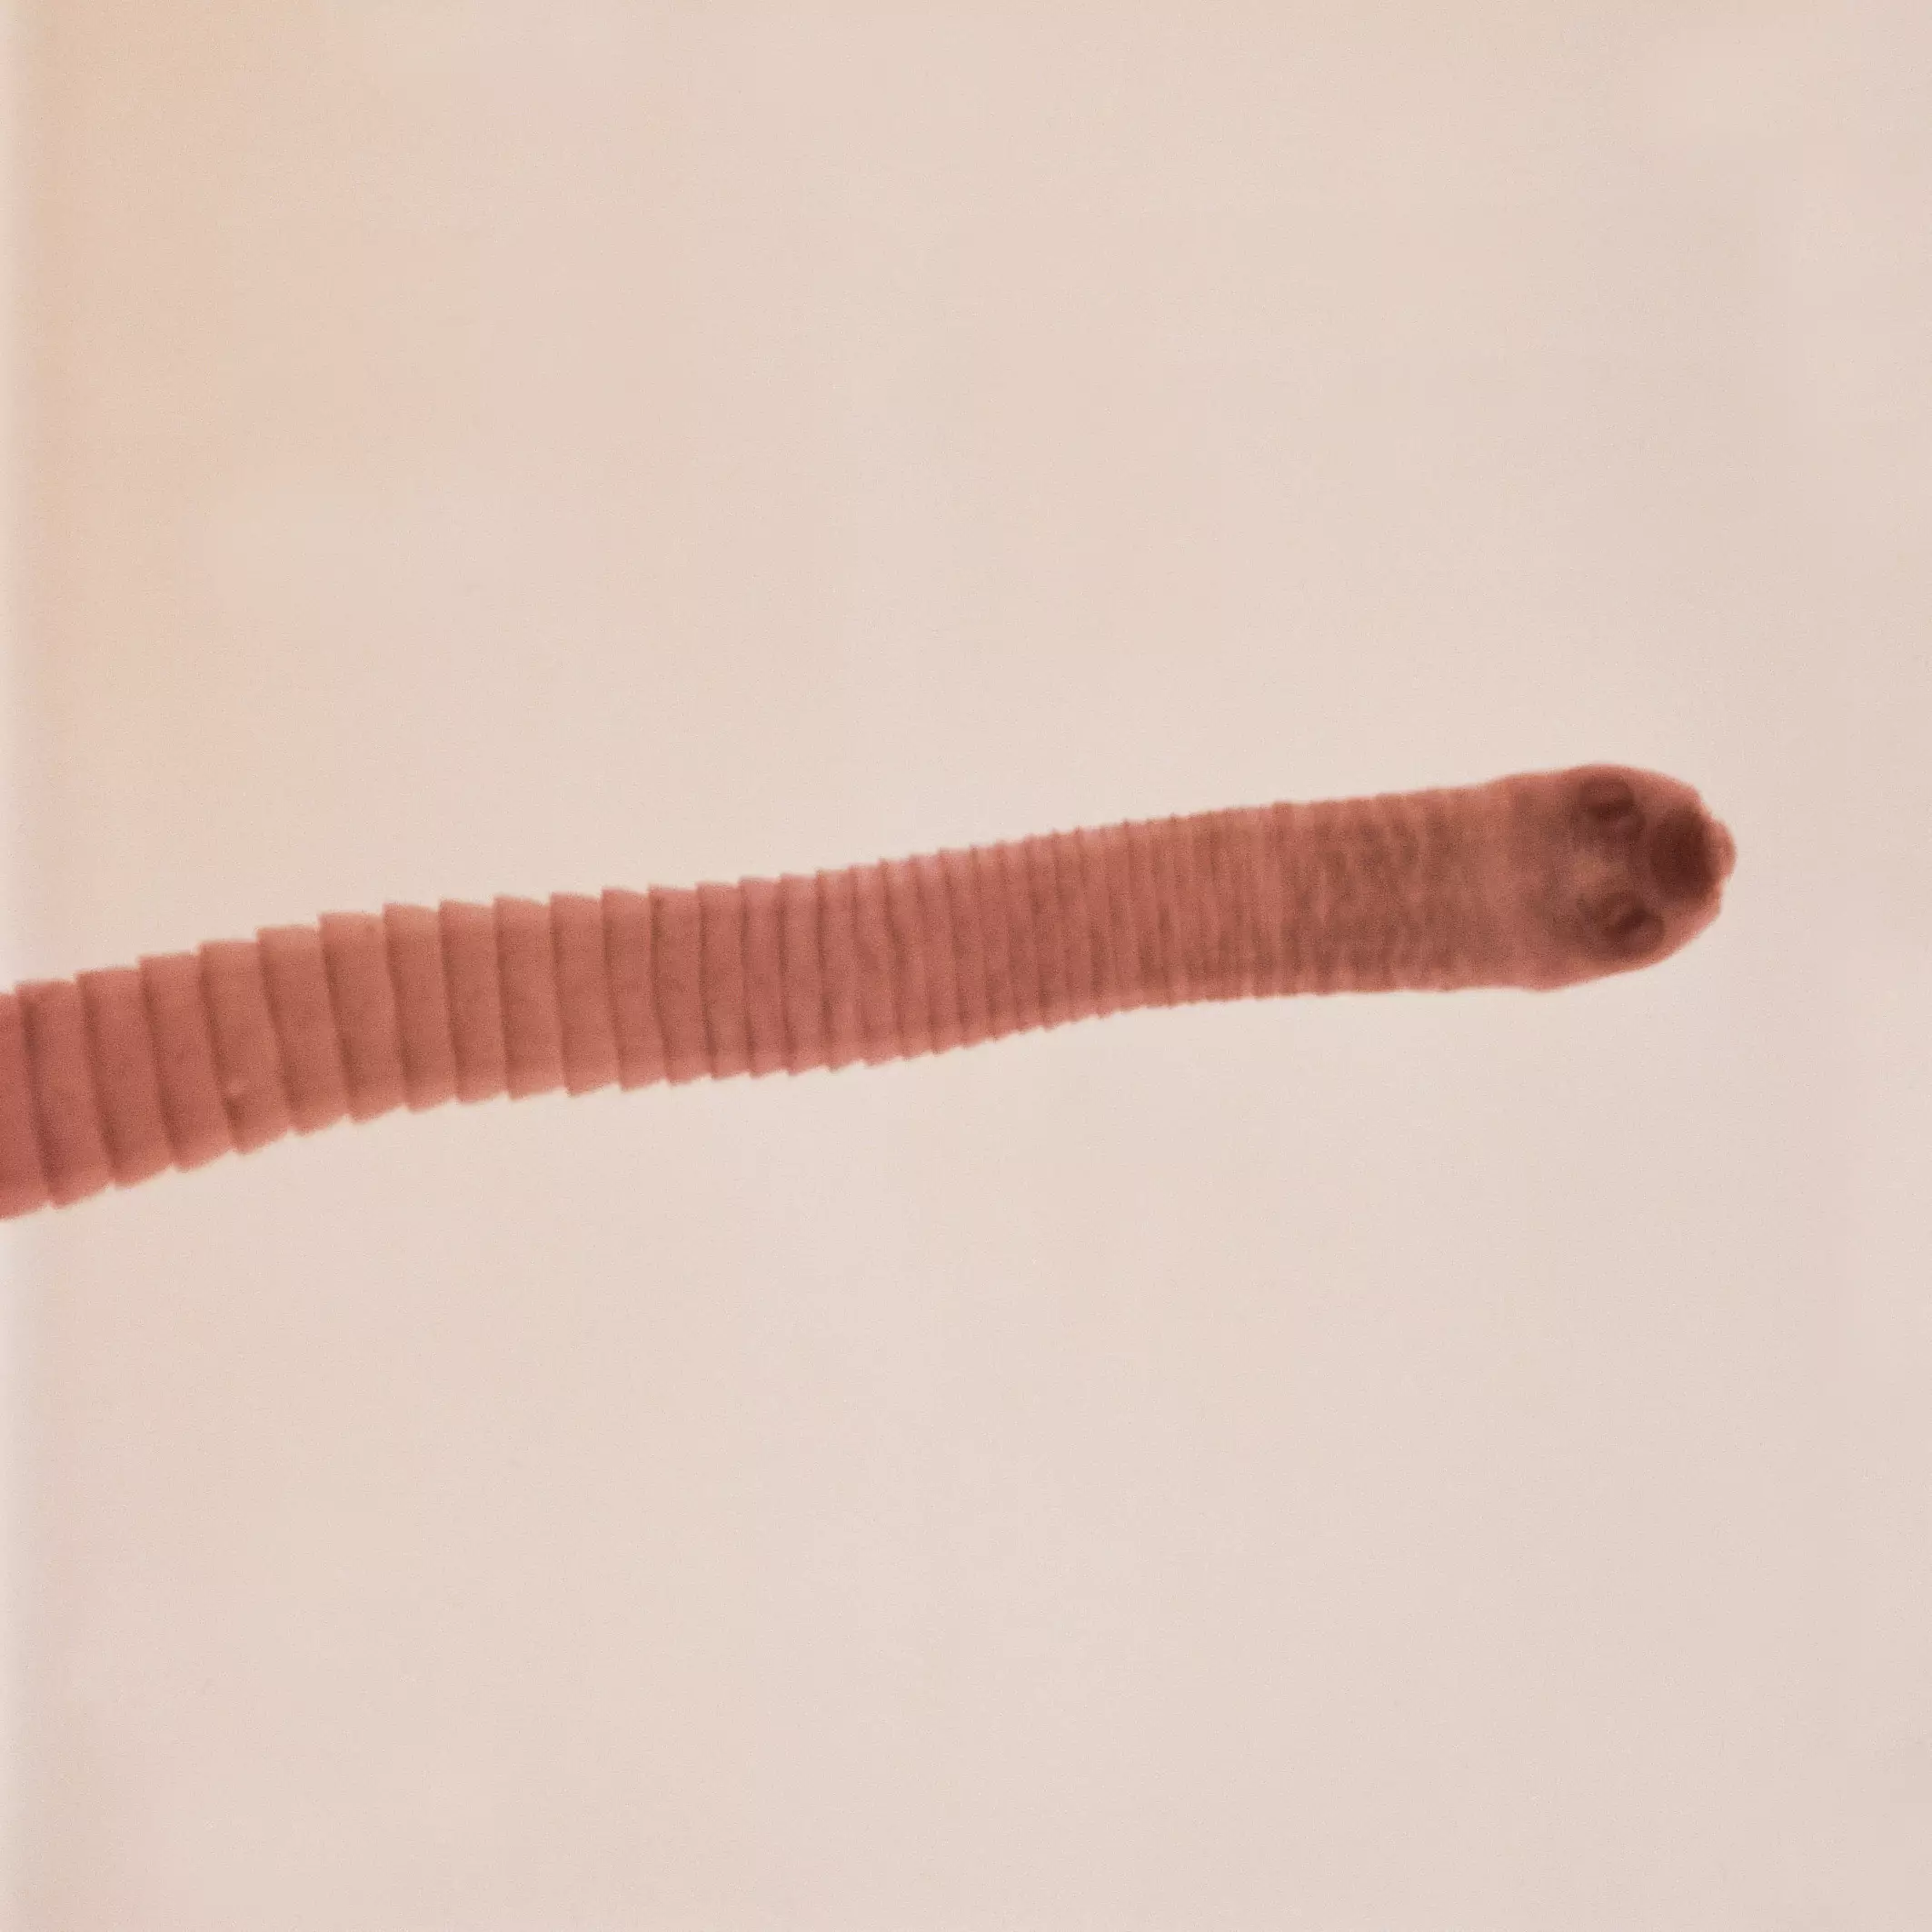 A tapeworm had been living inside of her for months.